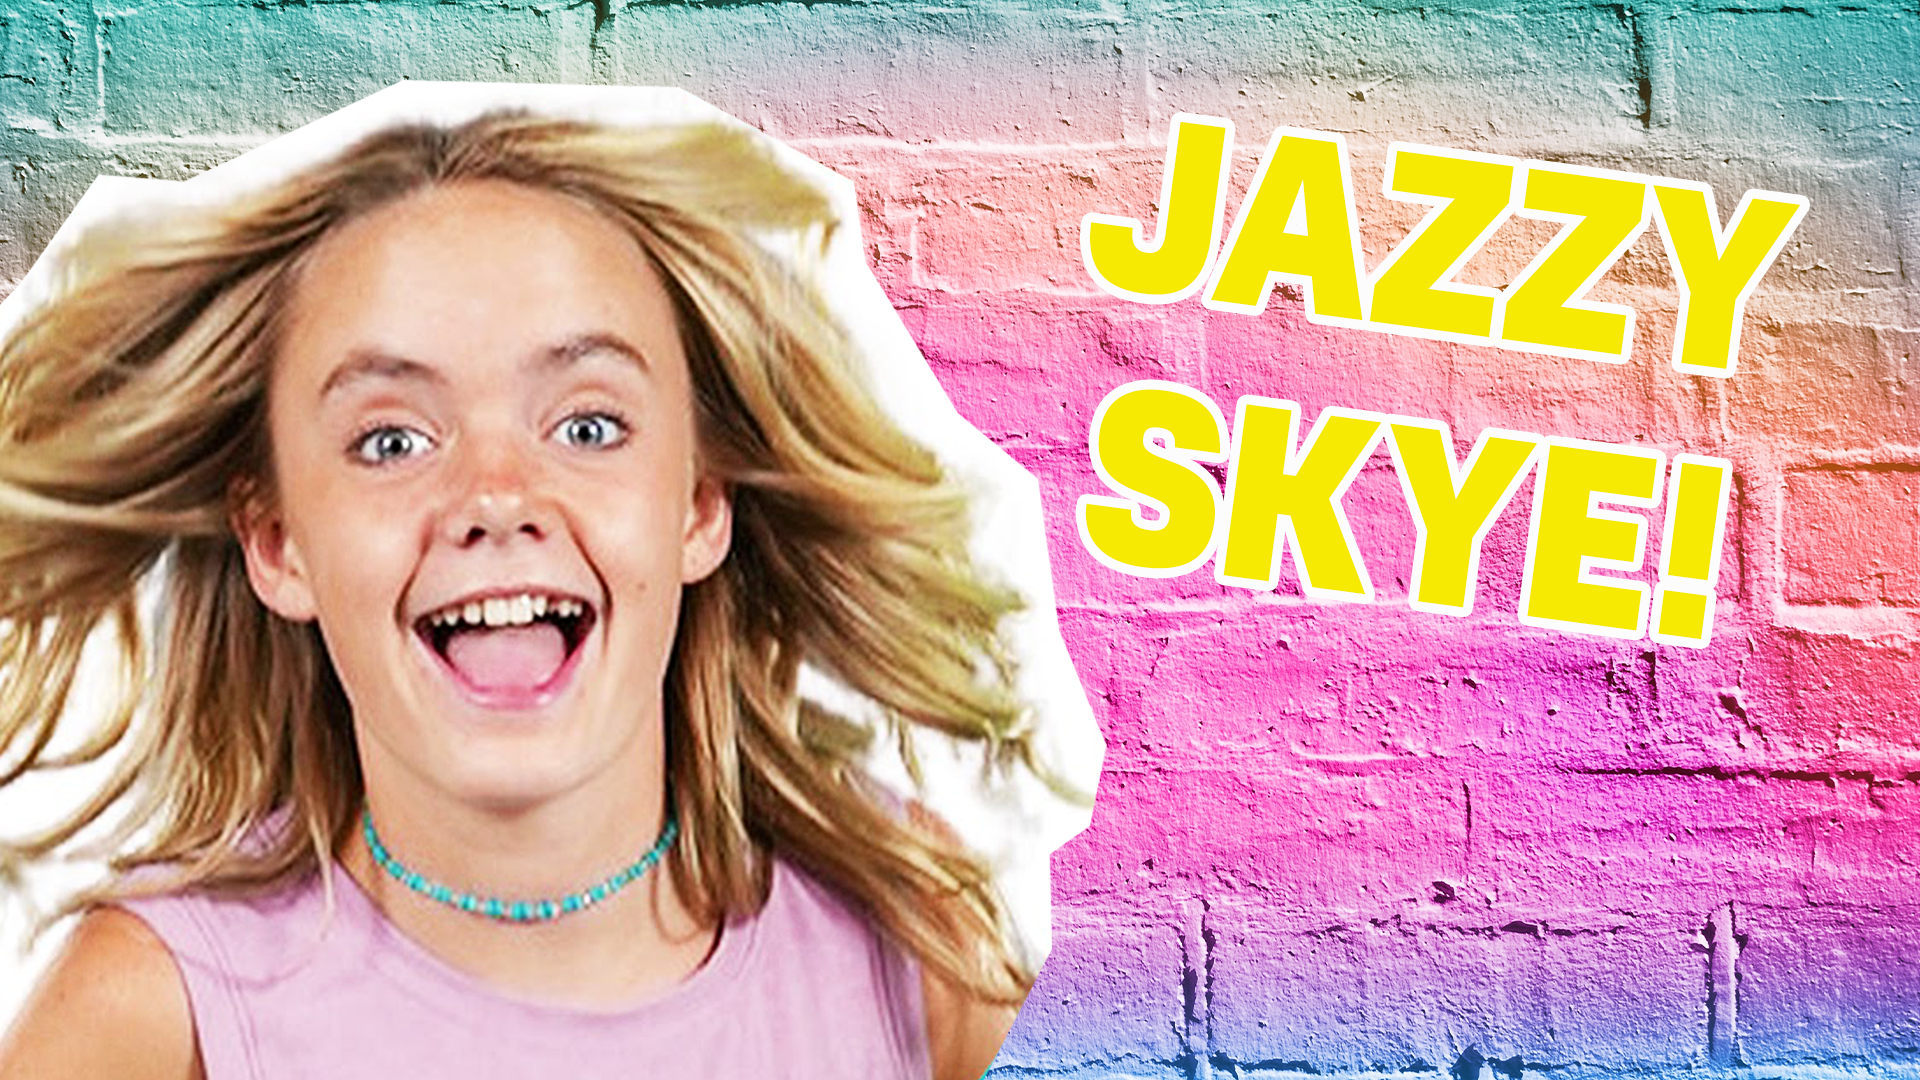 You should definitely watch Jazzy Skye's routine! It's packed full of laughs as Jazzy's normal routine goes horribly wrong - with the help of some friends!